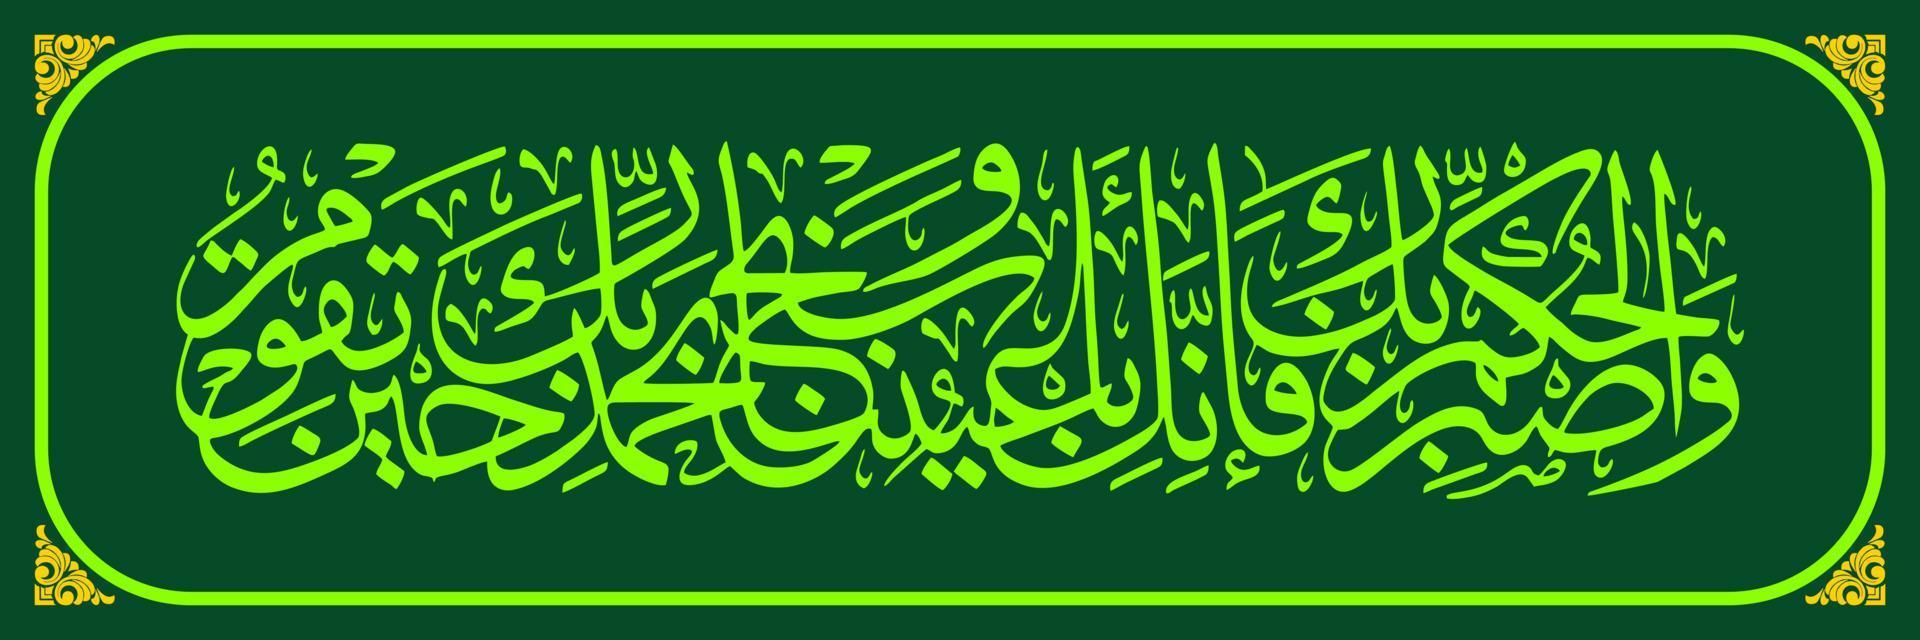 Arabic calligraphy, Quran Surah At tur Verse 48, translation And be patient in waiting for your Lord's decree, for verily you are under Our care, and glorify your Lord when you wake up vector